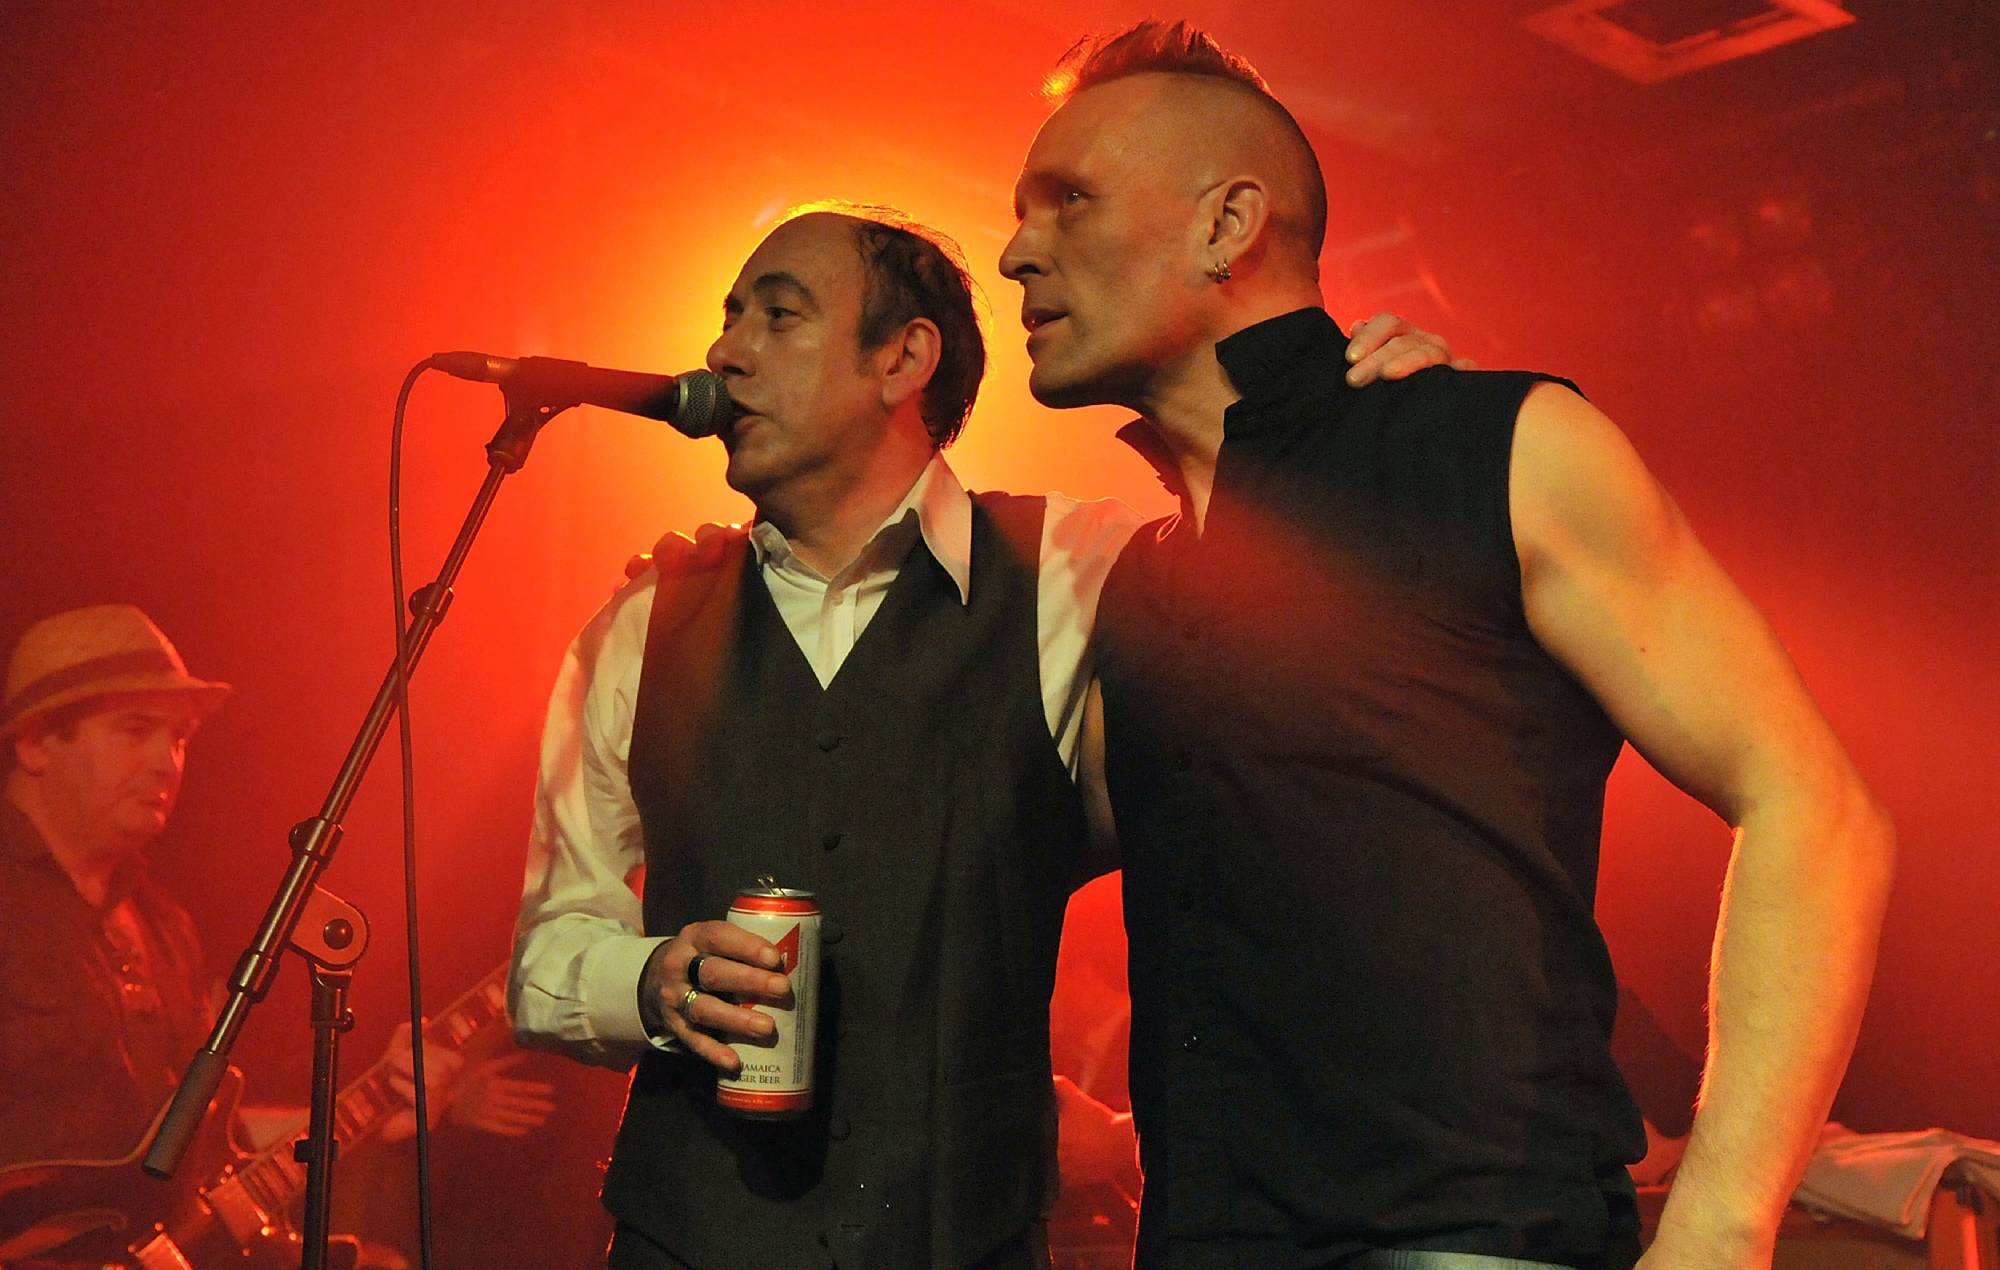 Mick Jones and John Robb speak on stage during the benefit event 'Justice Tonight' in aid of the Hillsborough Justice Campaign at the Scala in Kings Cross on December 8, 2011 in London, United Kingdom. (Photo by Jim Dyson/Getty Images)